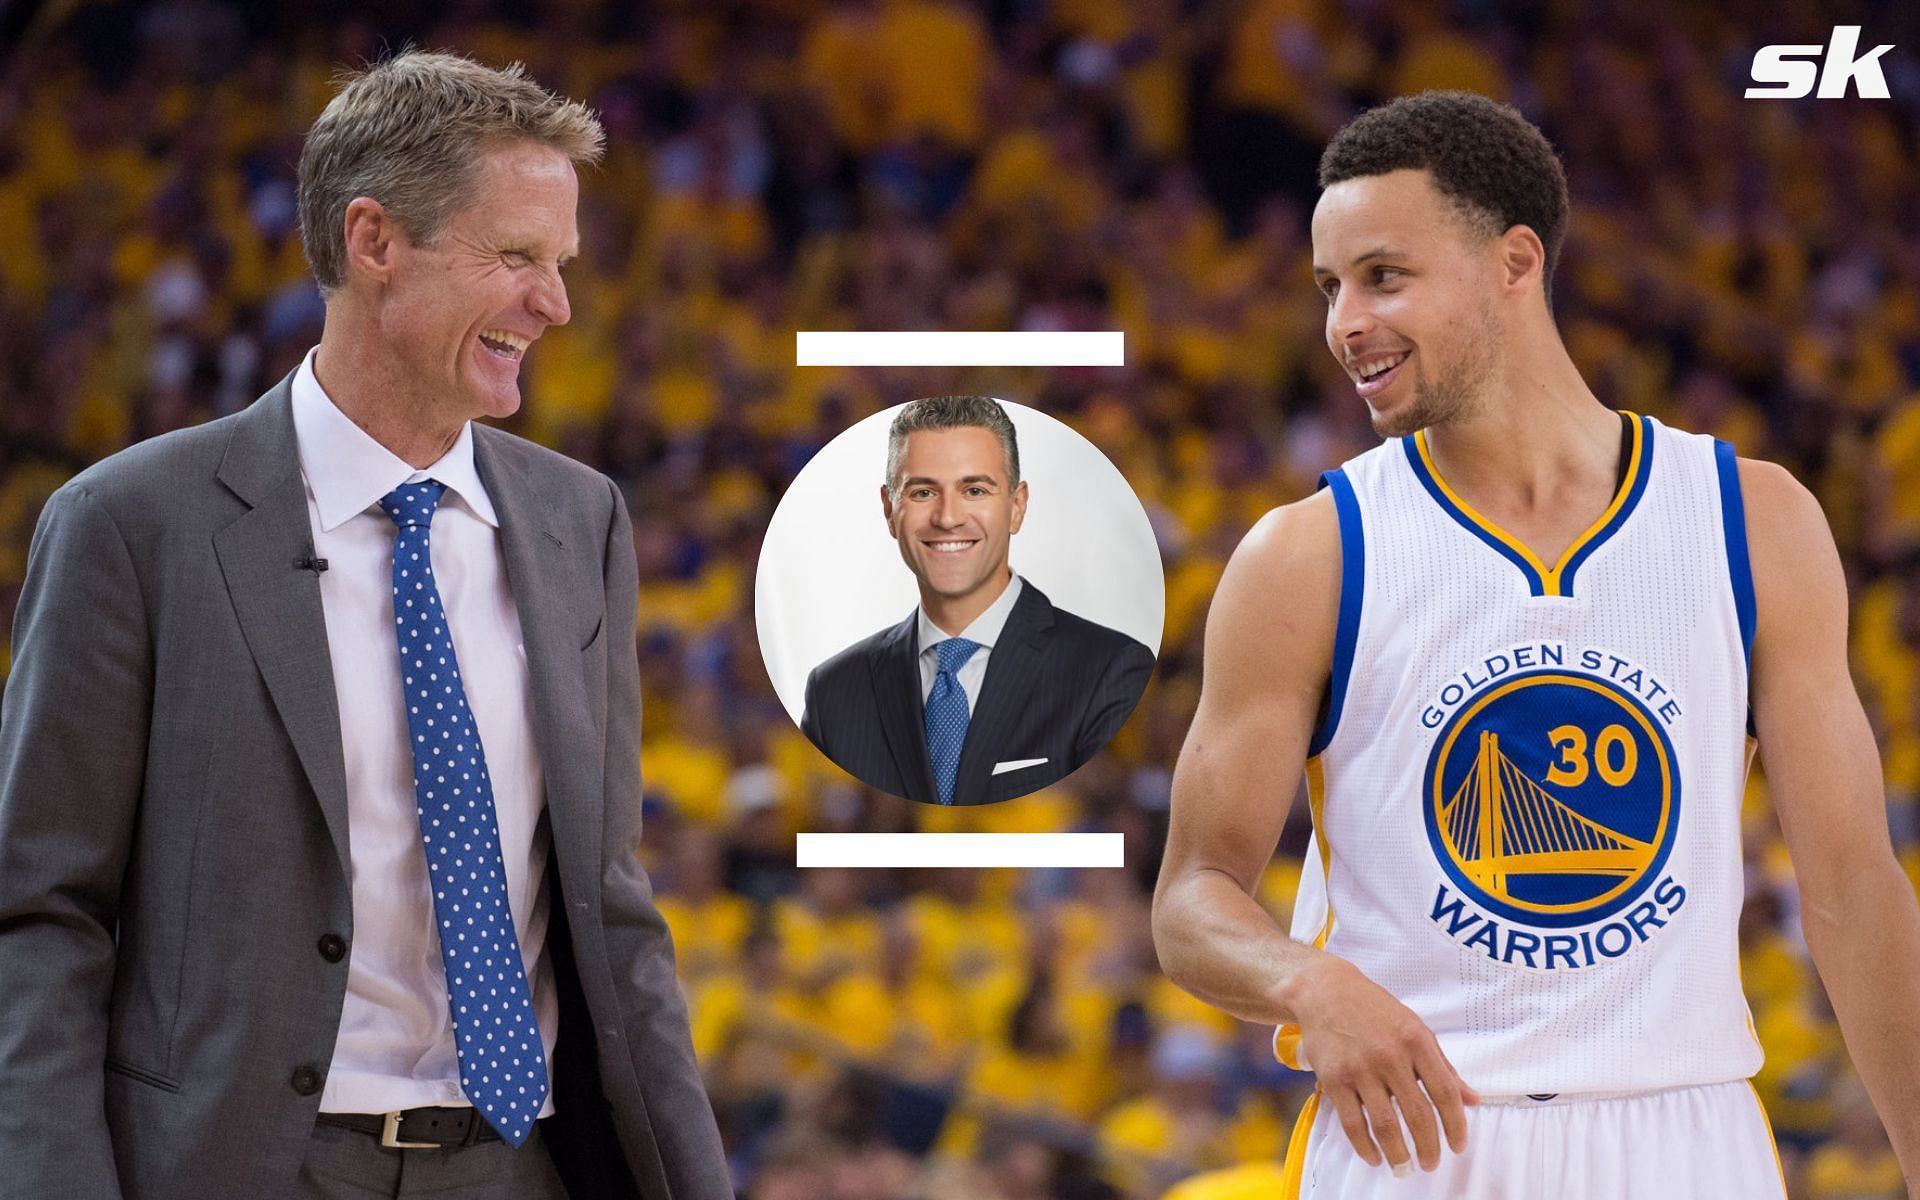 Steph Curry, Steve Kerr, and the Golden State Warriors plan to bounce back in Game 2 of NBA Finals